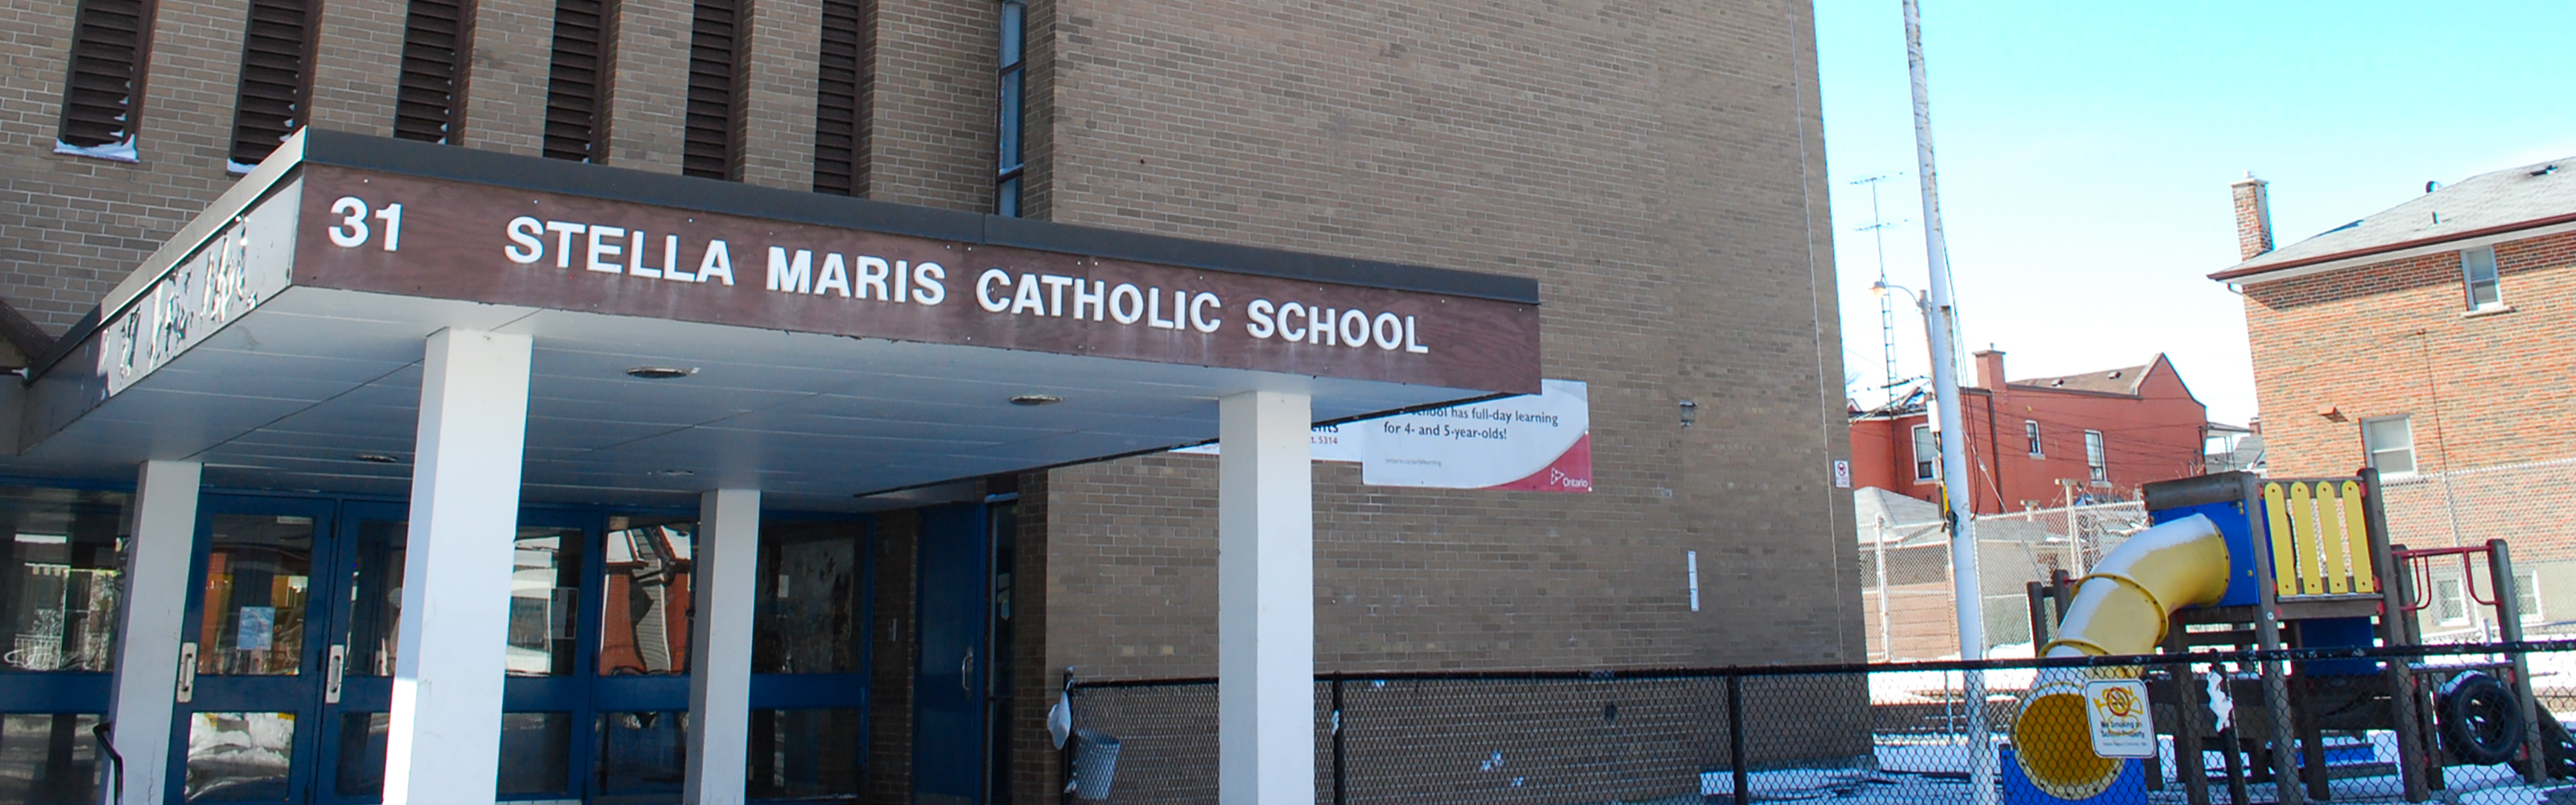 The front of the Stella Maris Catholic School building.